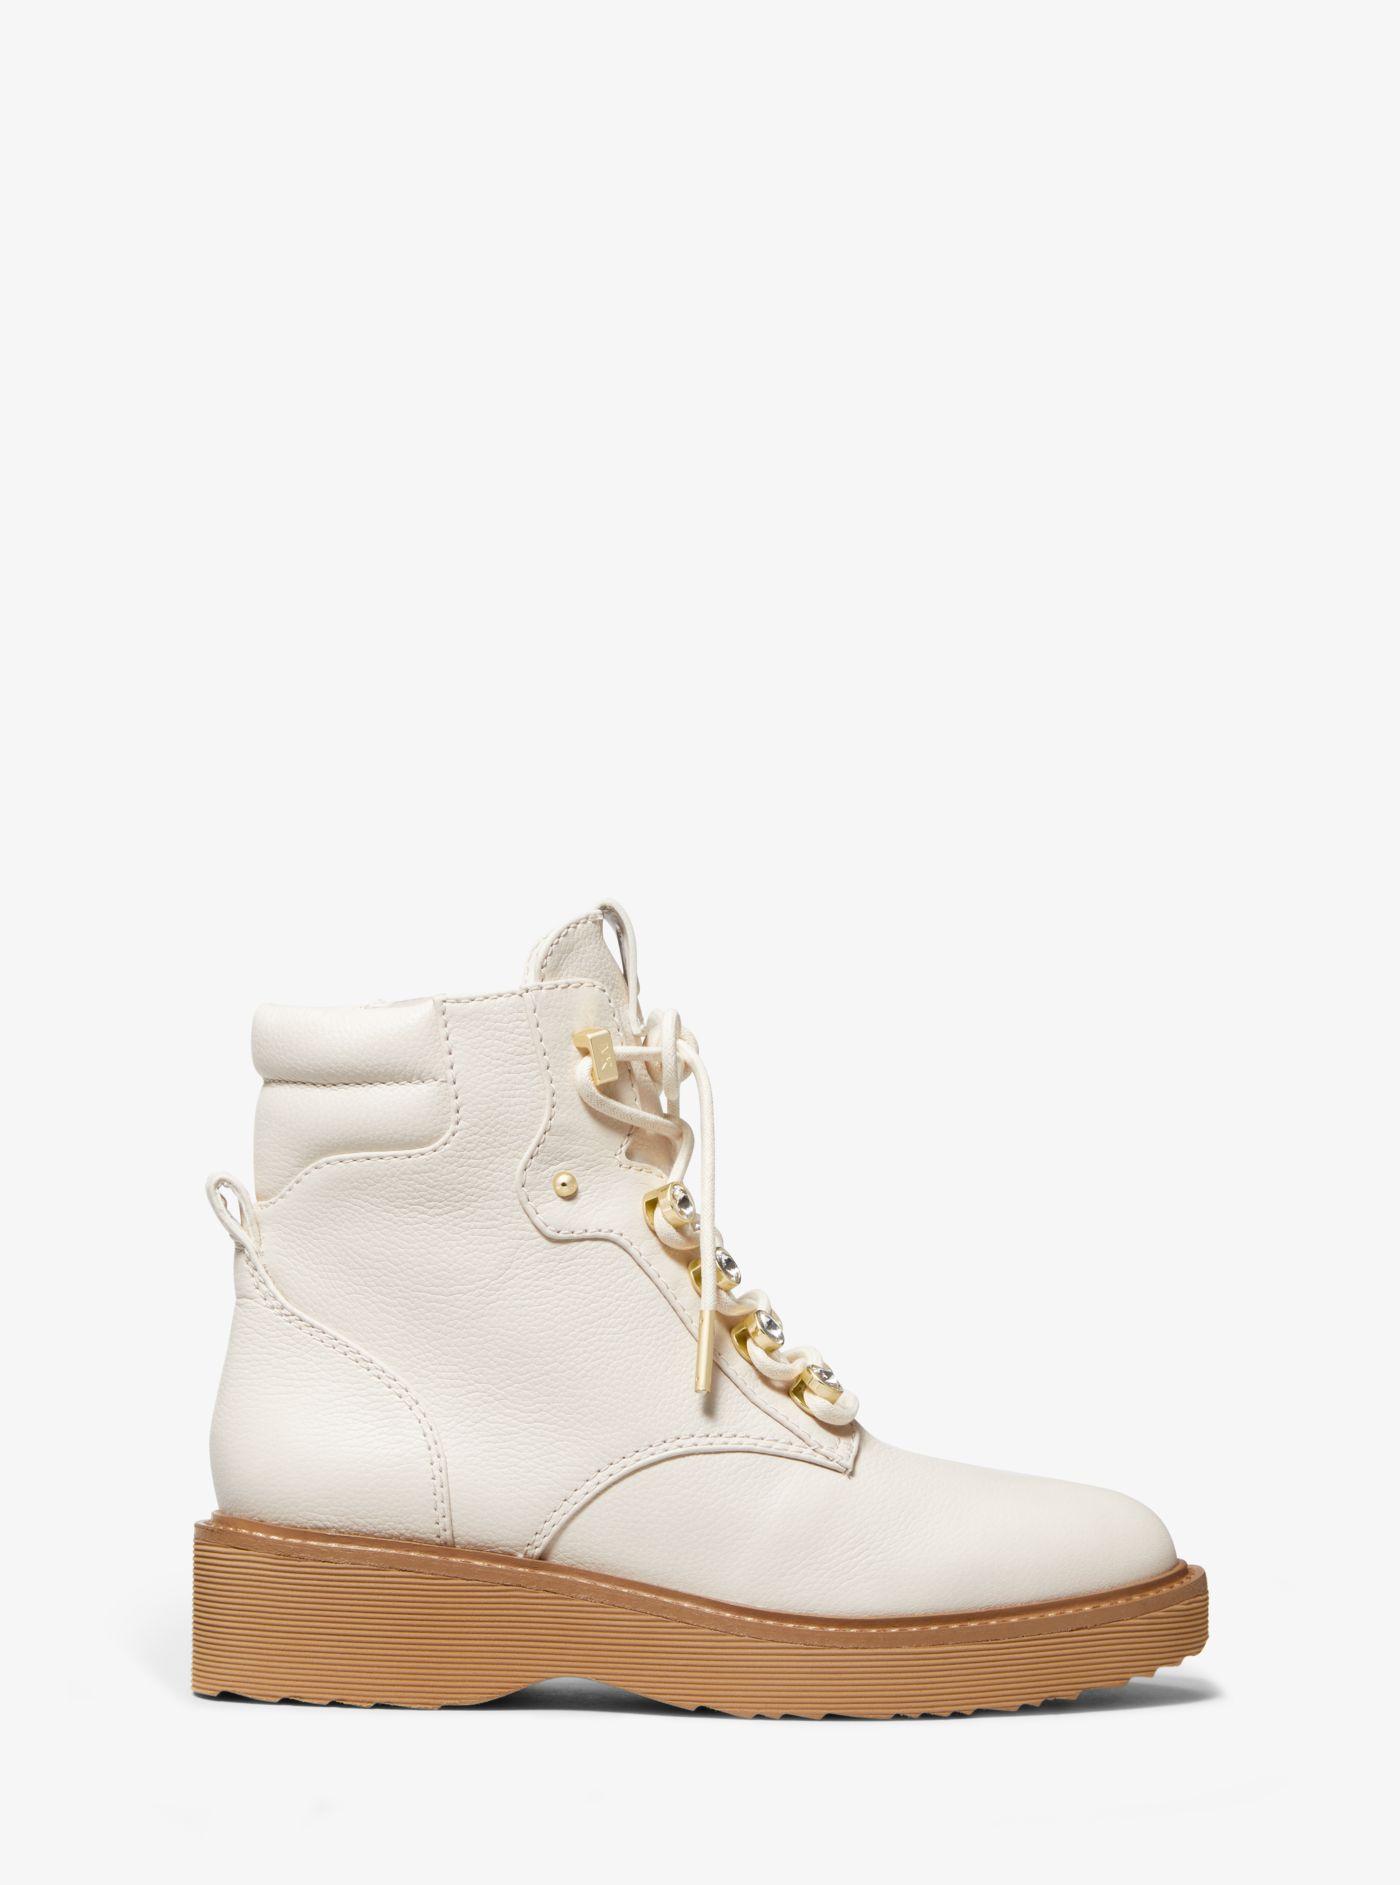 Michael Kors Trudy Embellished Leather Boot in Natural | Lyst